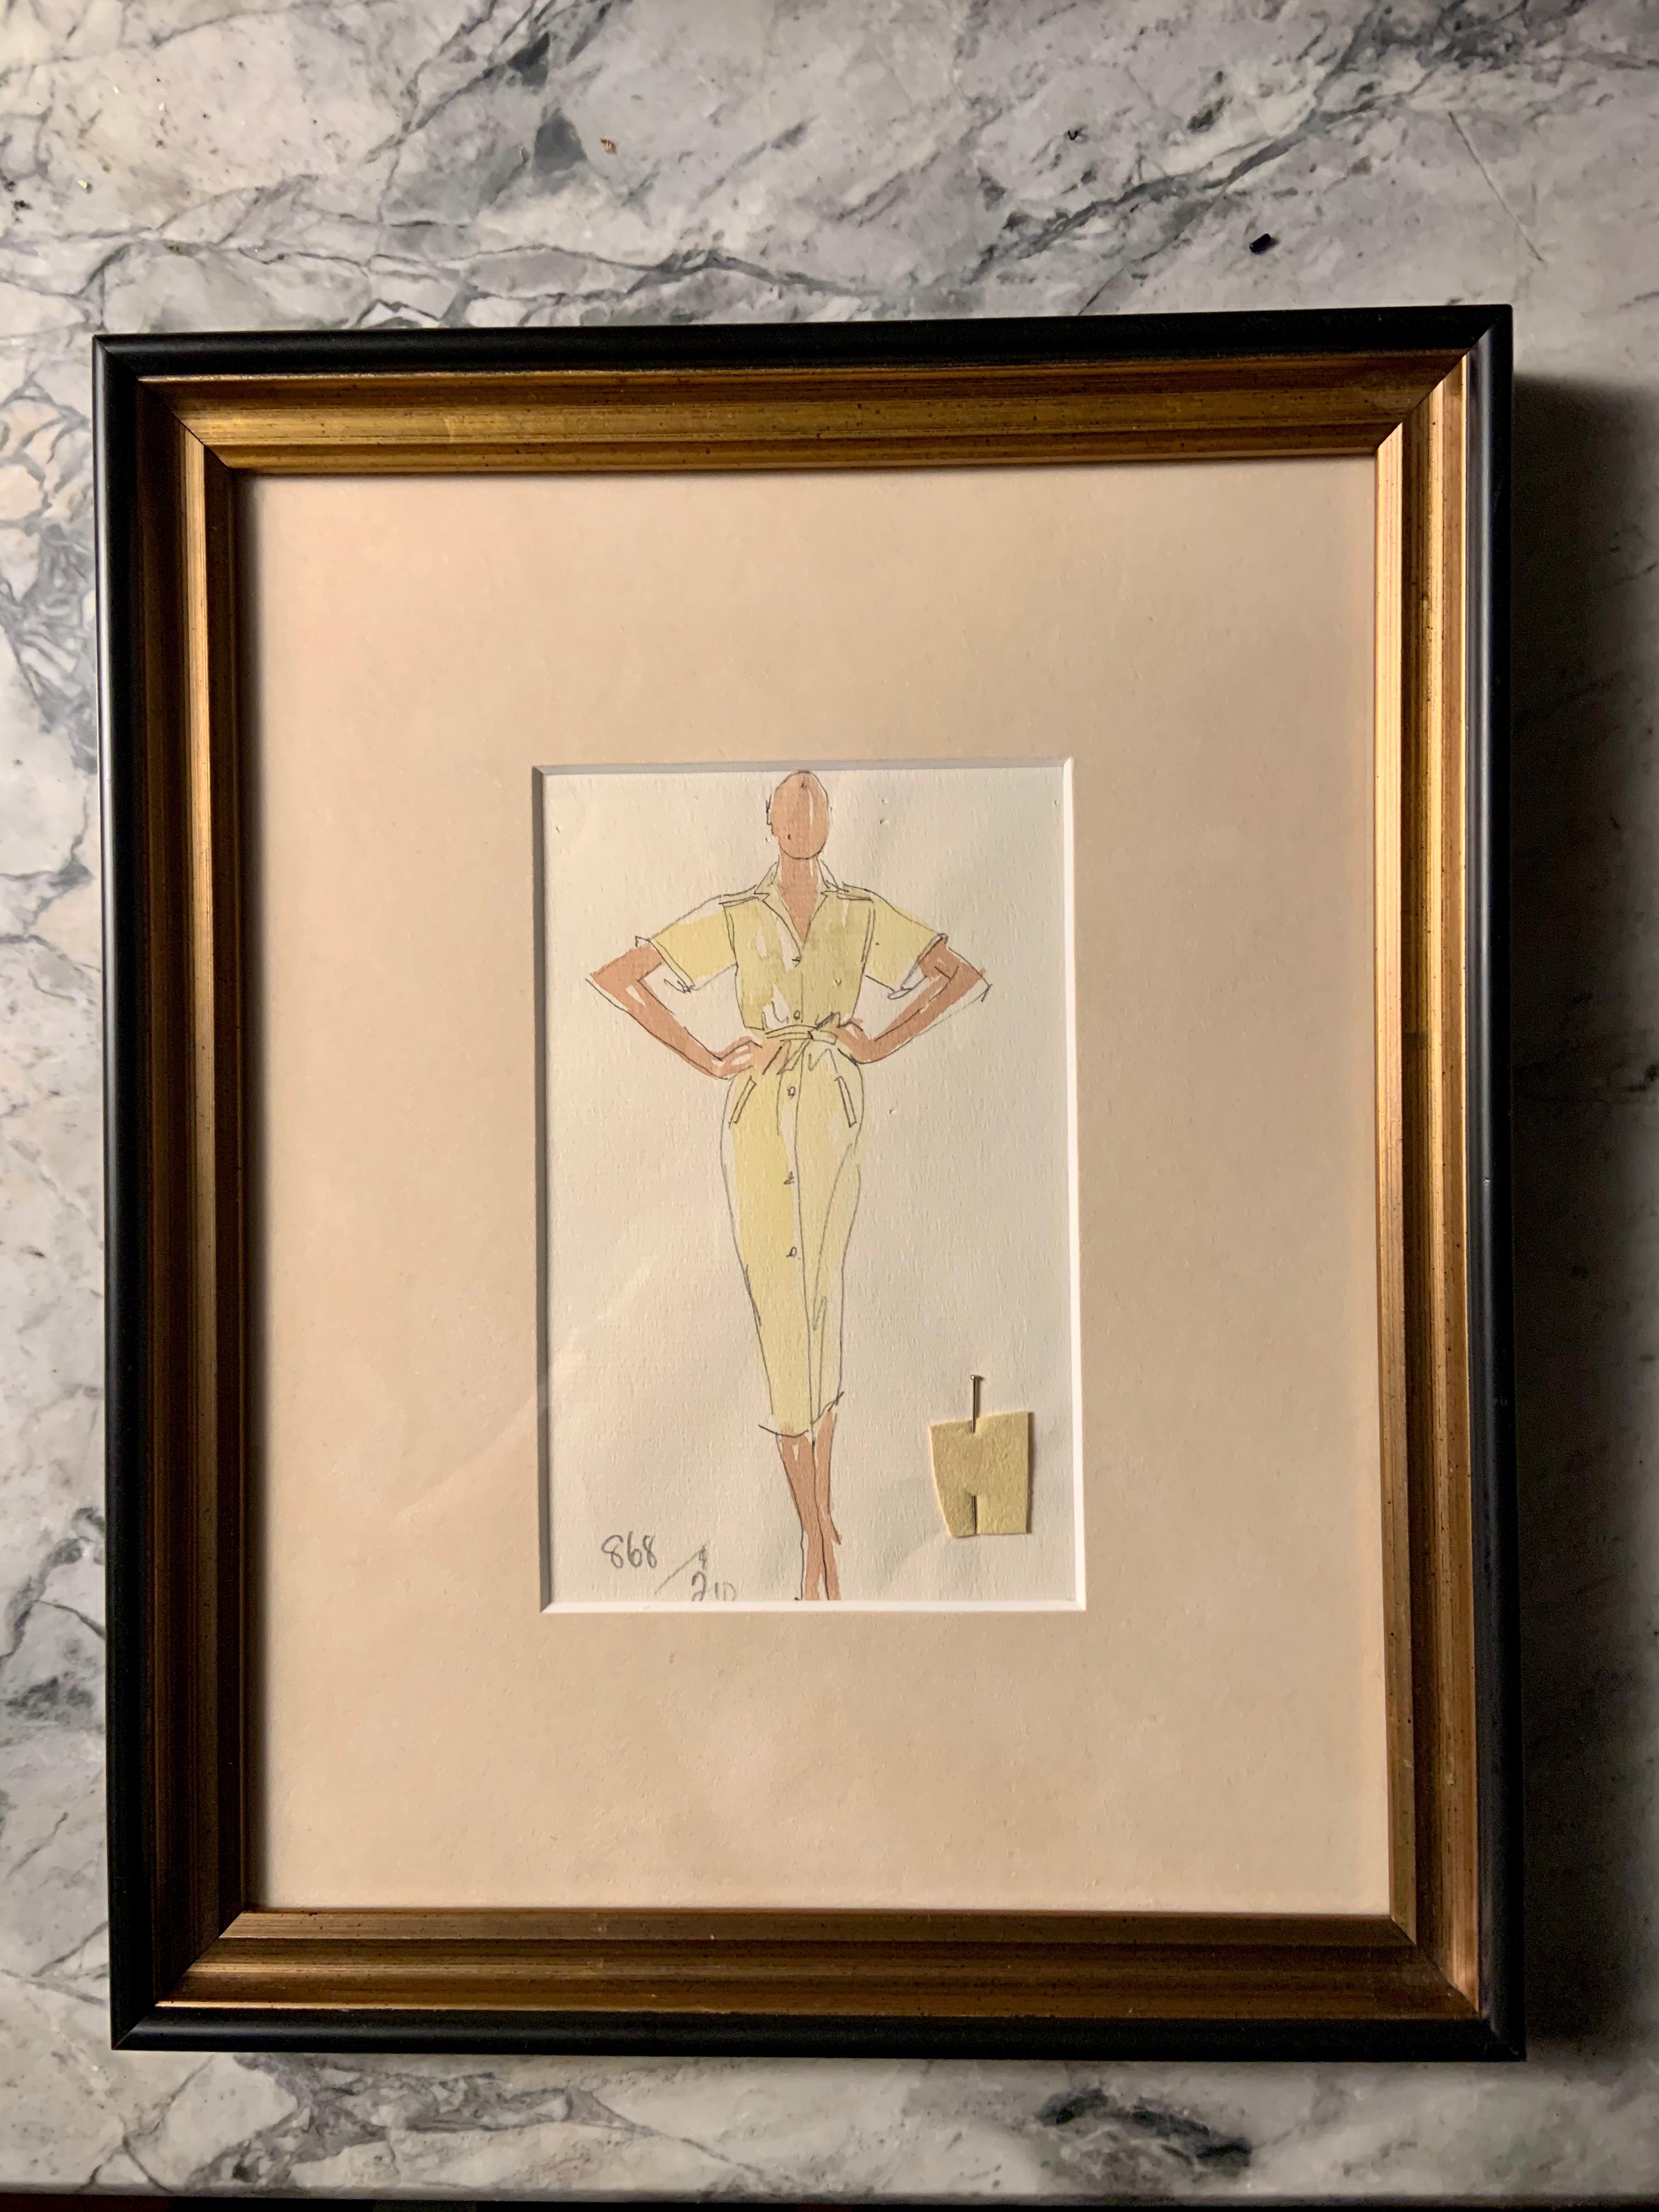 This is a rare and original Joe Eula fashion sketch of a Halston yellow Ultrasuede dress design, complete with an attached fabric swatch of Ultrasuede. This drawing is from an estate auction of personal possessions of Martha Graham, a close friend